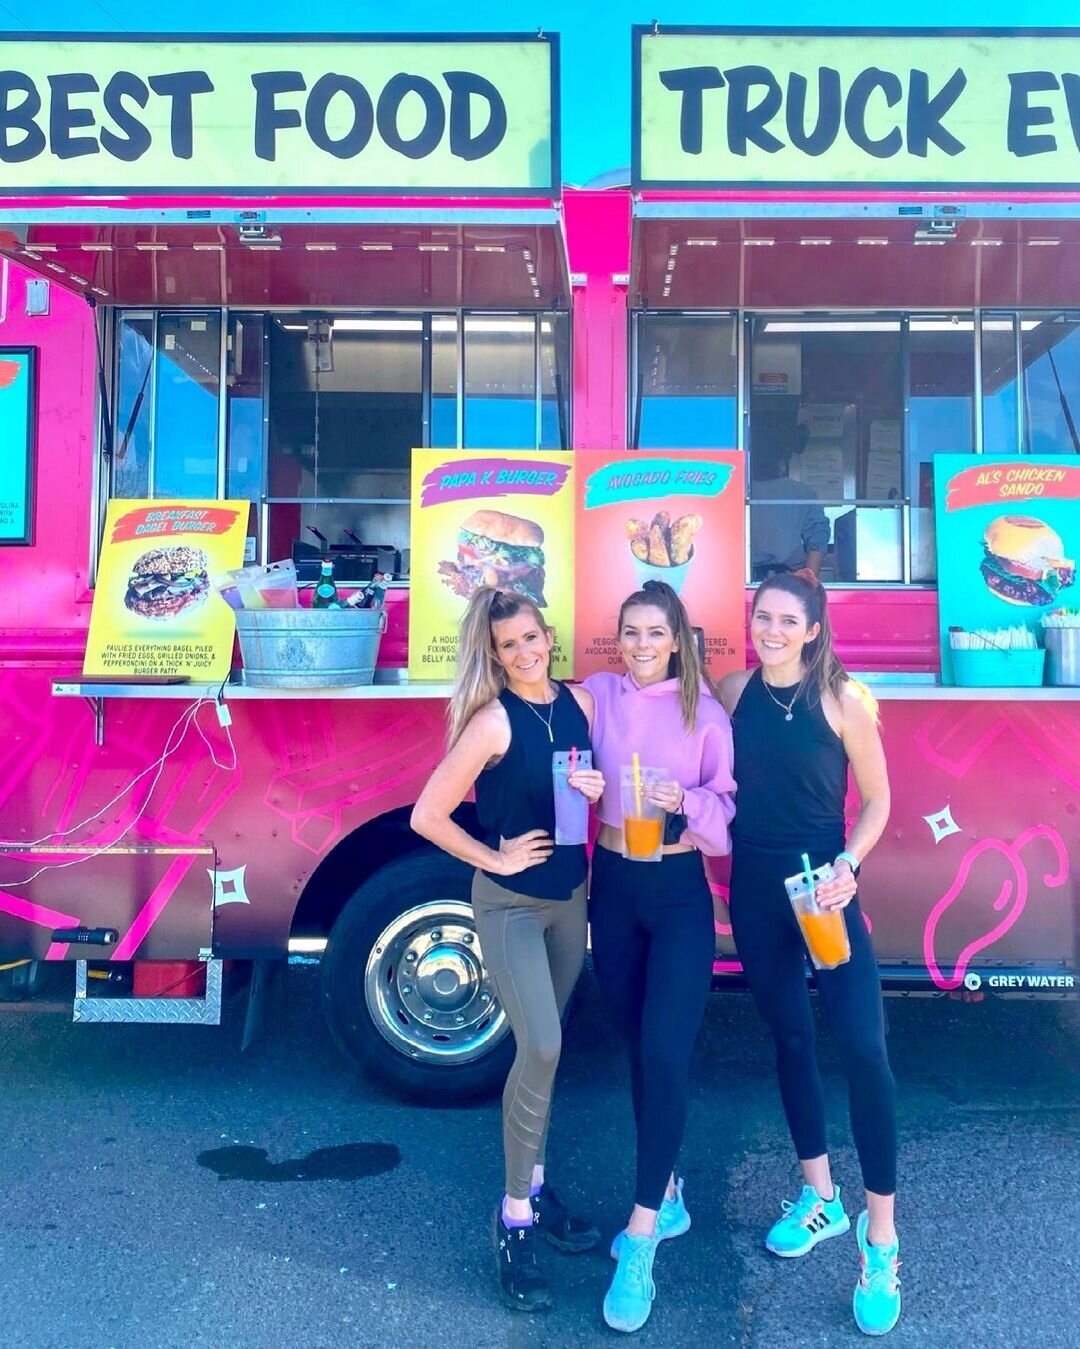 Families that grub together, stick together 💜⁠
⁠
🦄 See the #bestfoodtruckever menu, locations, or ask about catering at www.bestfoodtruckever.co (link in bio!)